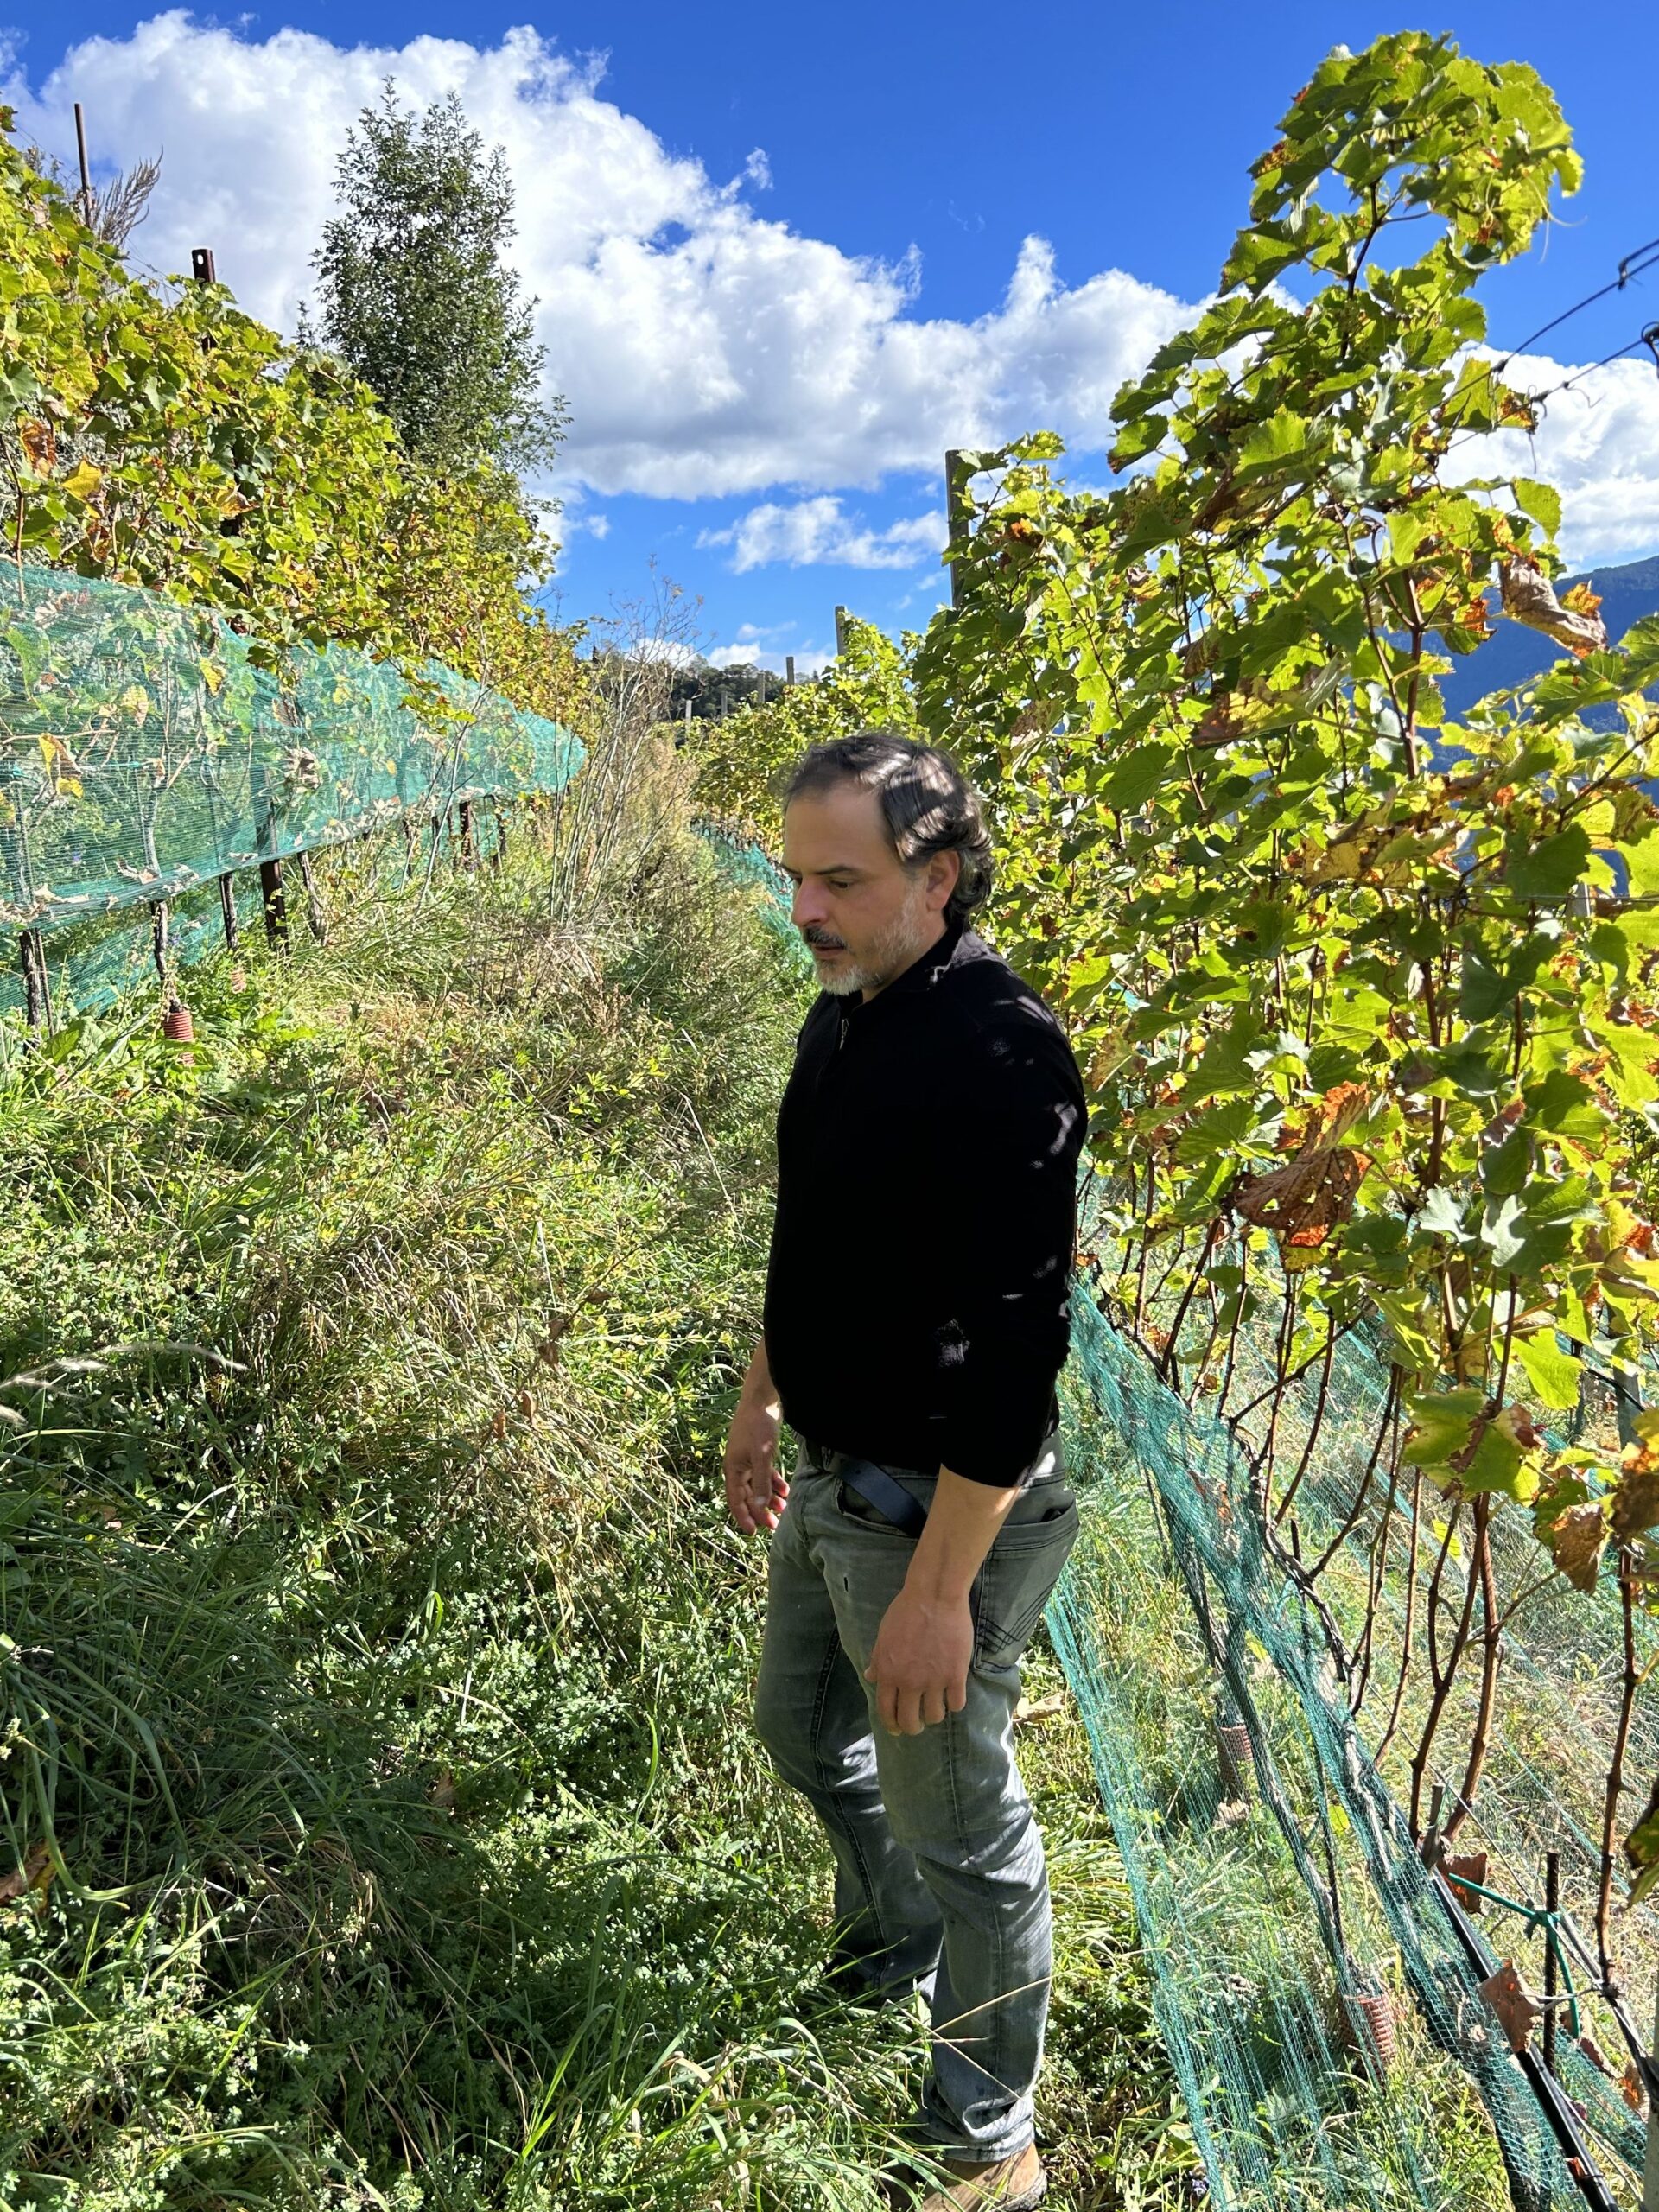 Dominic Würth in the vineyards of GraWü